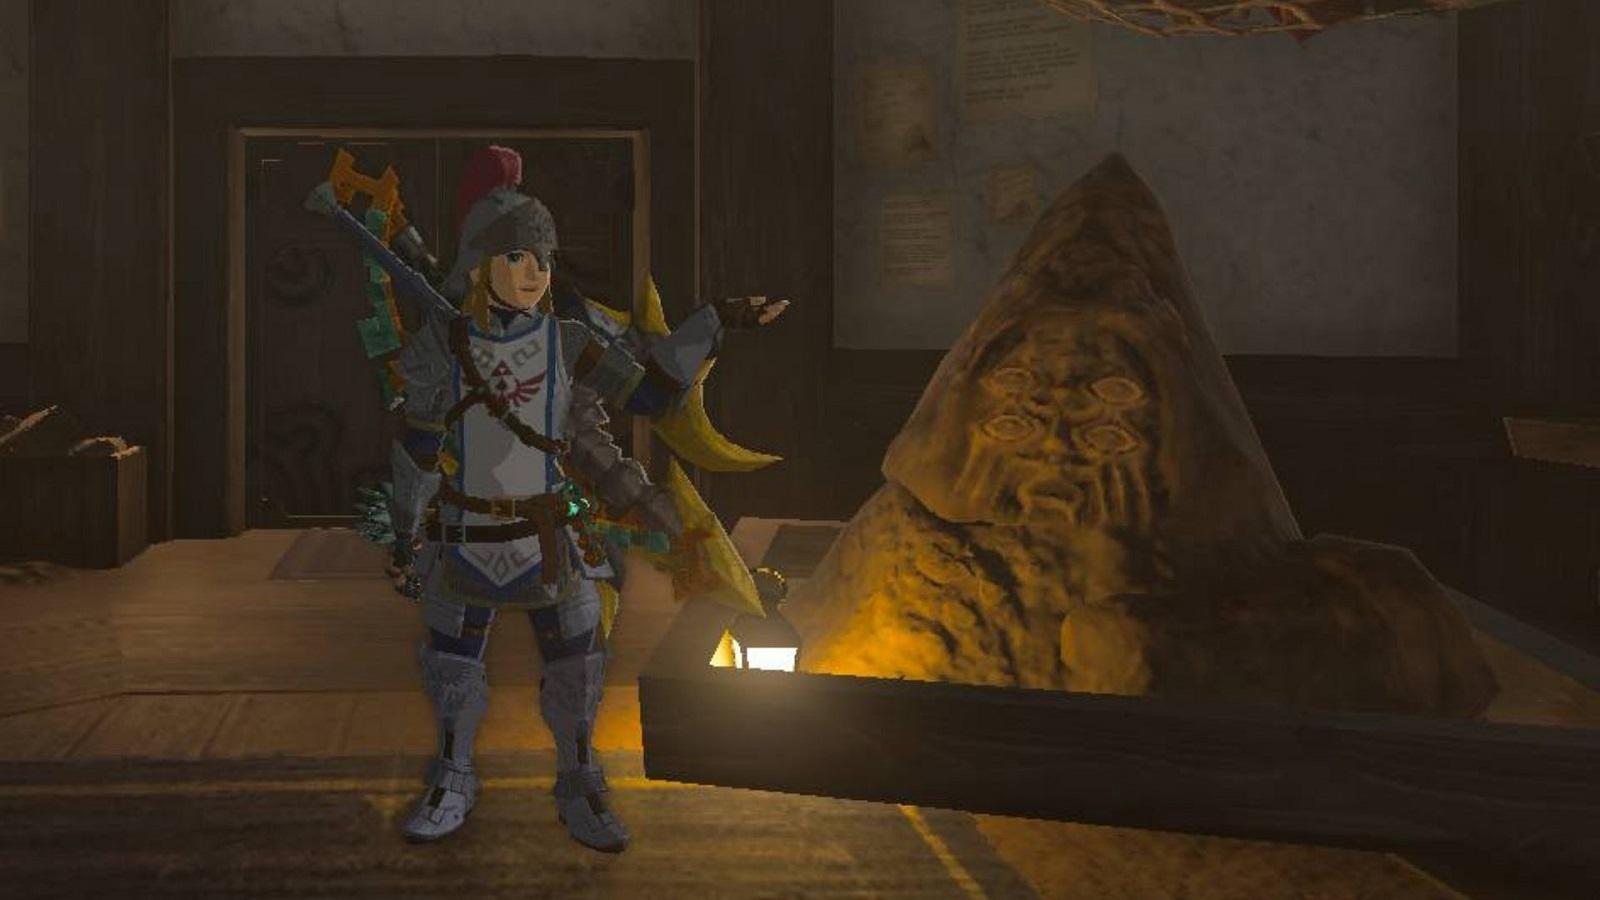 Link standing next to a Bargainer Statue